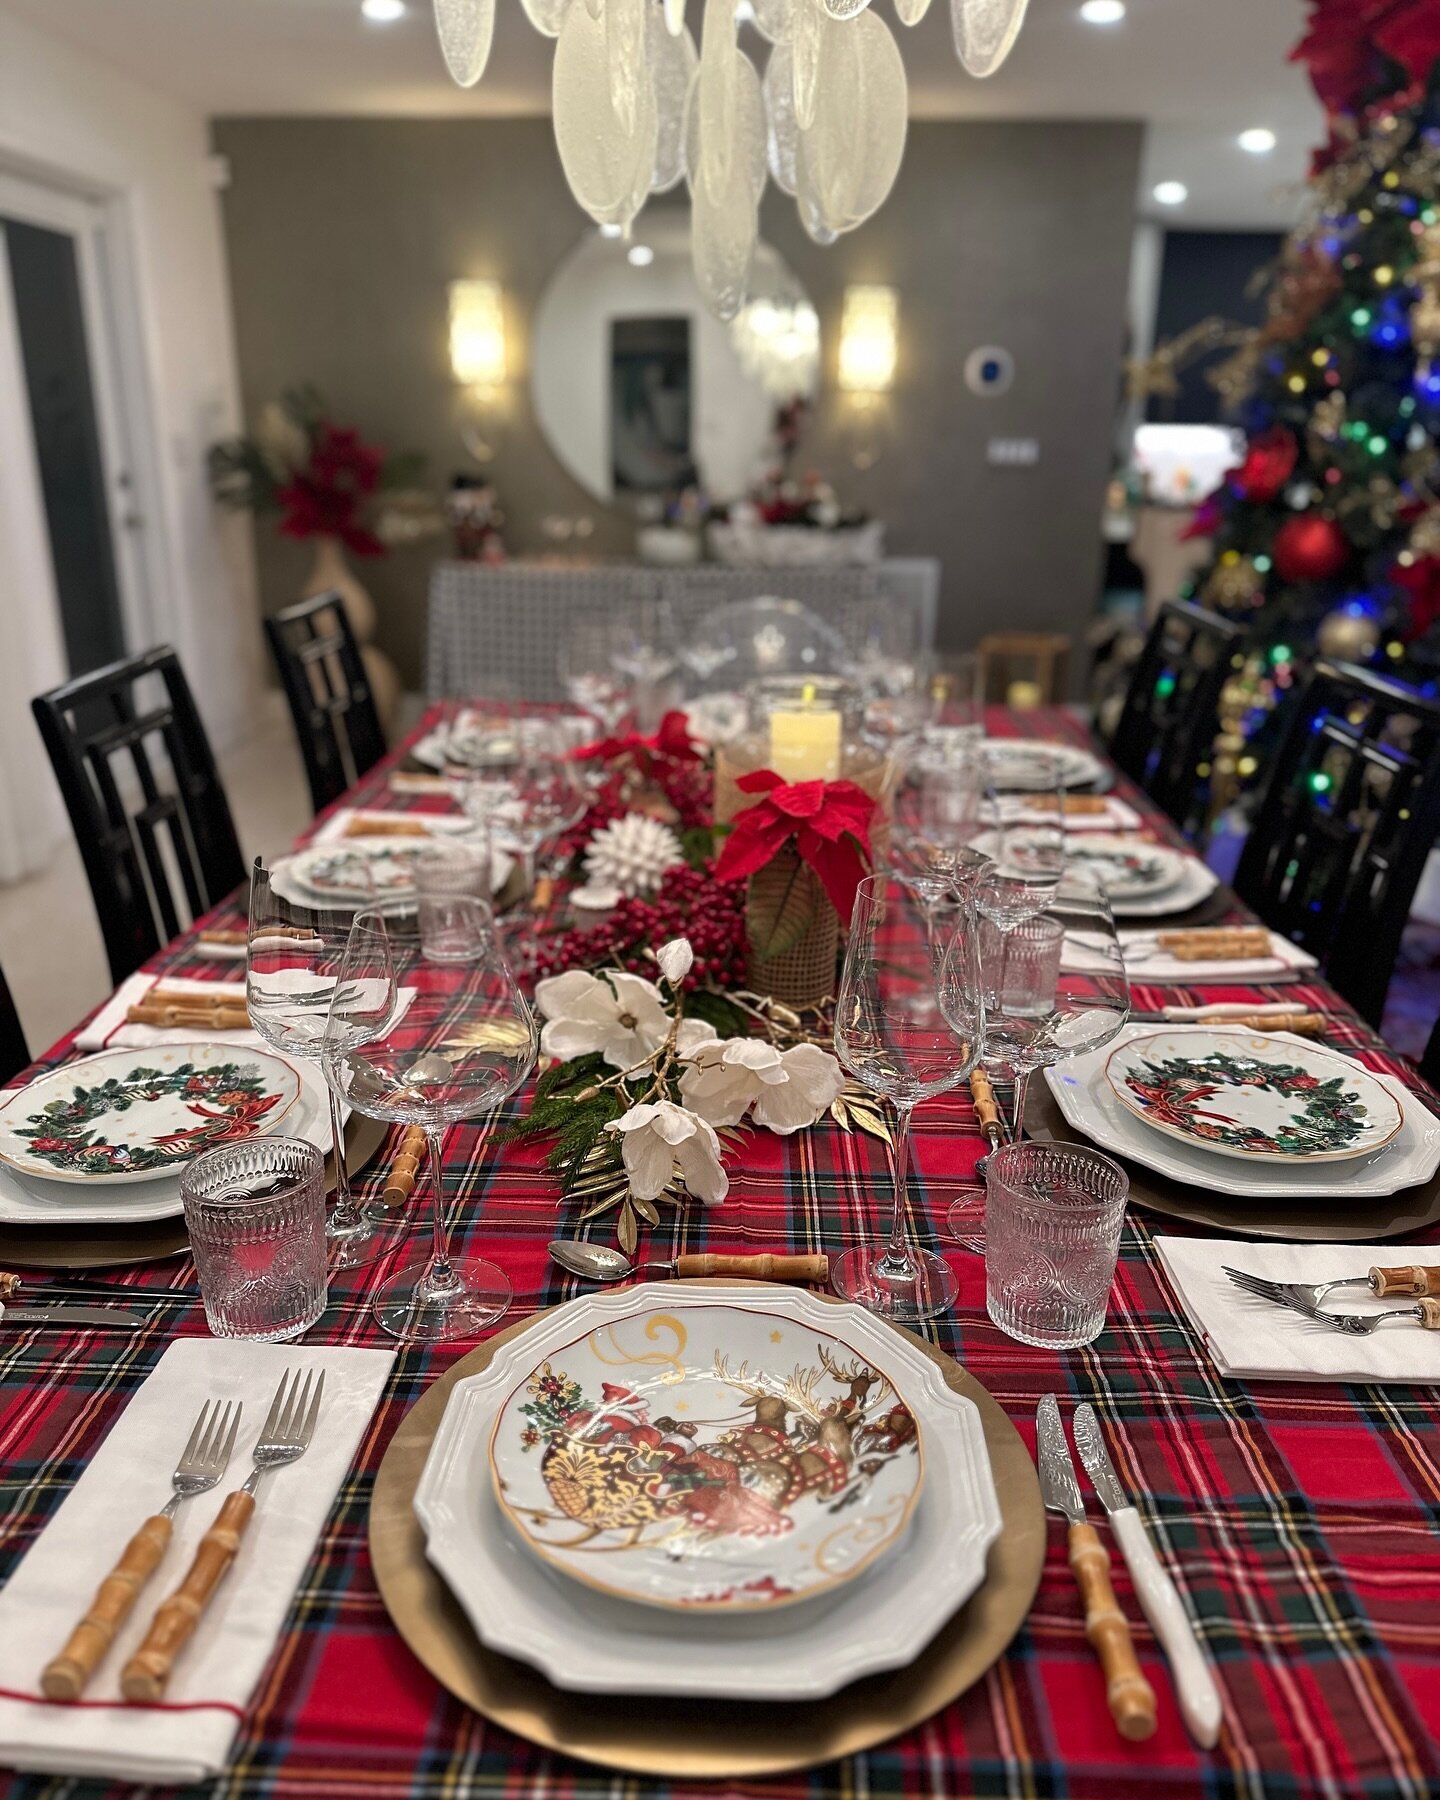 Let the festivities begin!  We love a pretty, creative, christmassy table 🎅🏻❤️

#kerifeeneyhome #interiordesign  #interiordesigner #floridadesign #floridaliving #coastaldesign
#designflorida #interiordecor #interiors #christmastablesetting #tablese